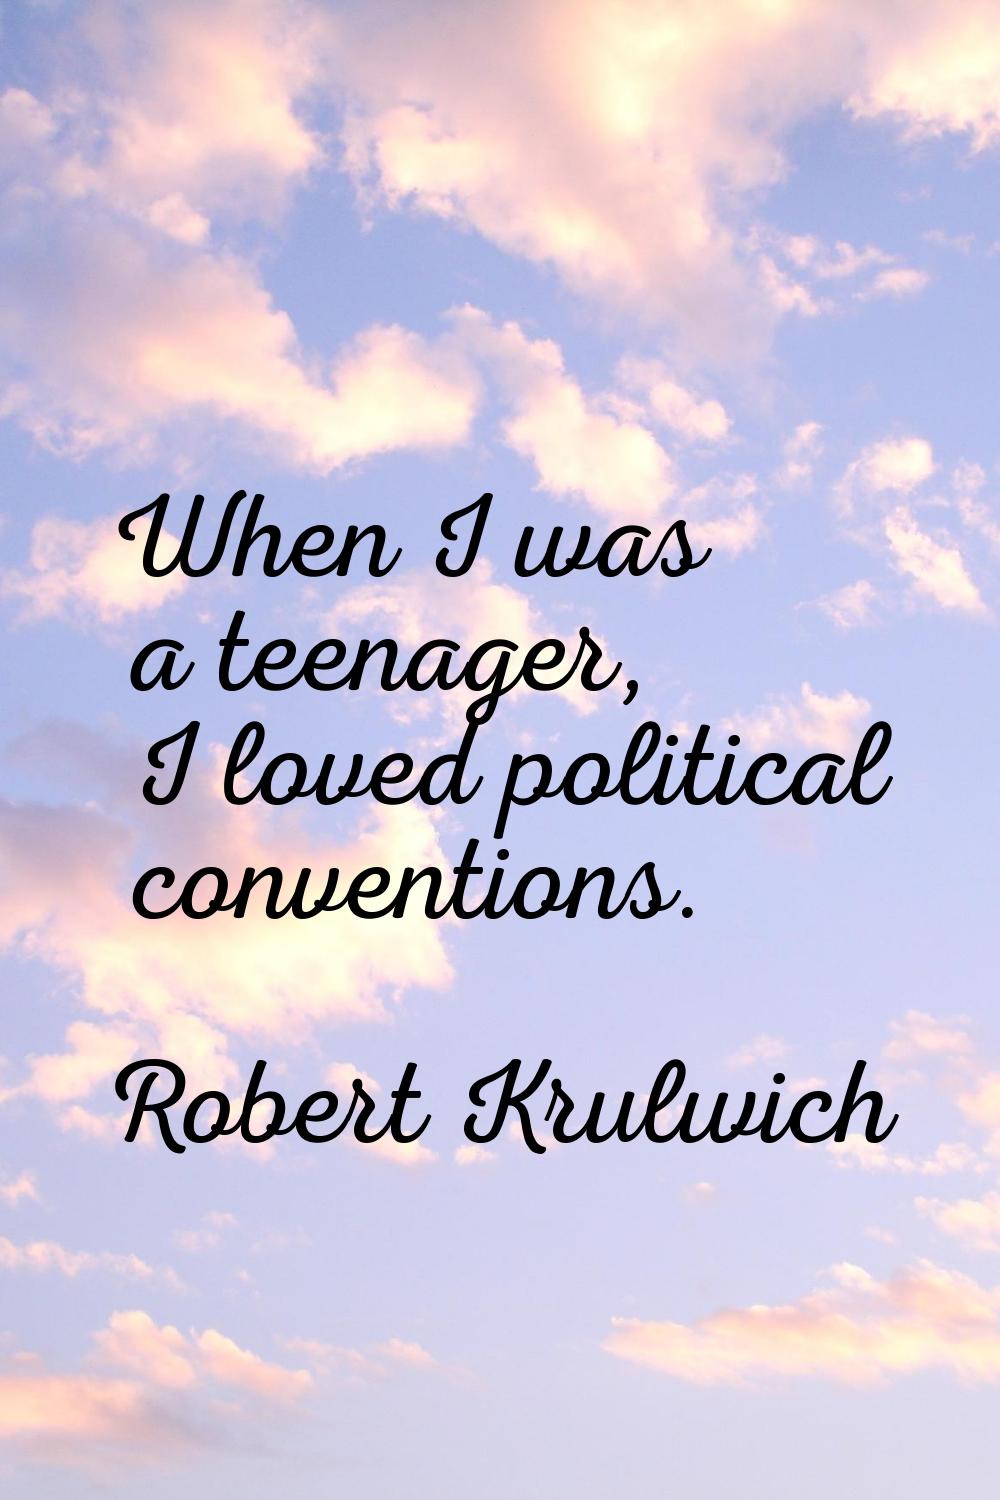 When I was a teenager, I loved political conventions.